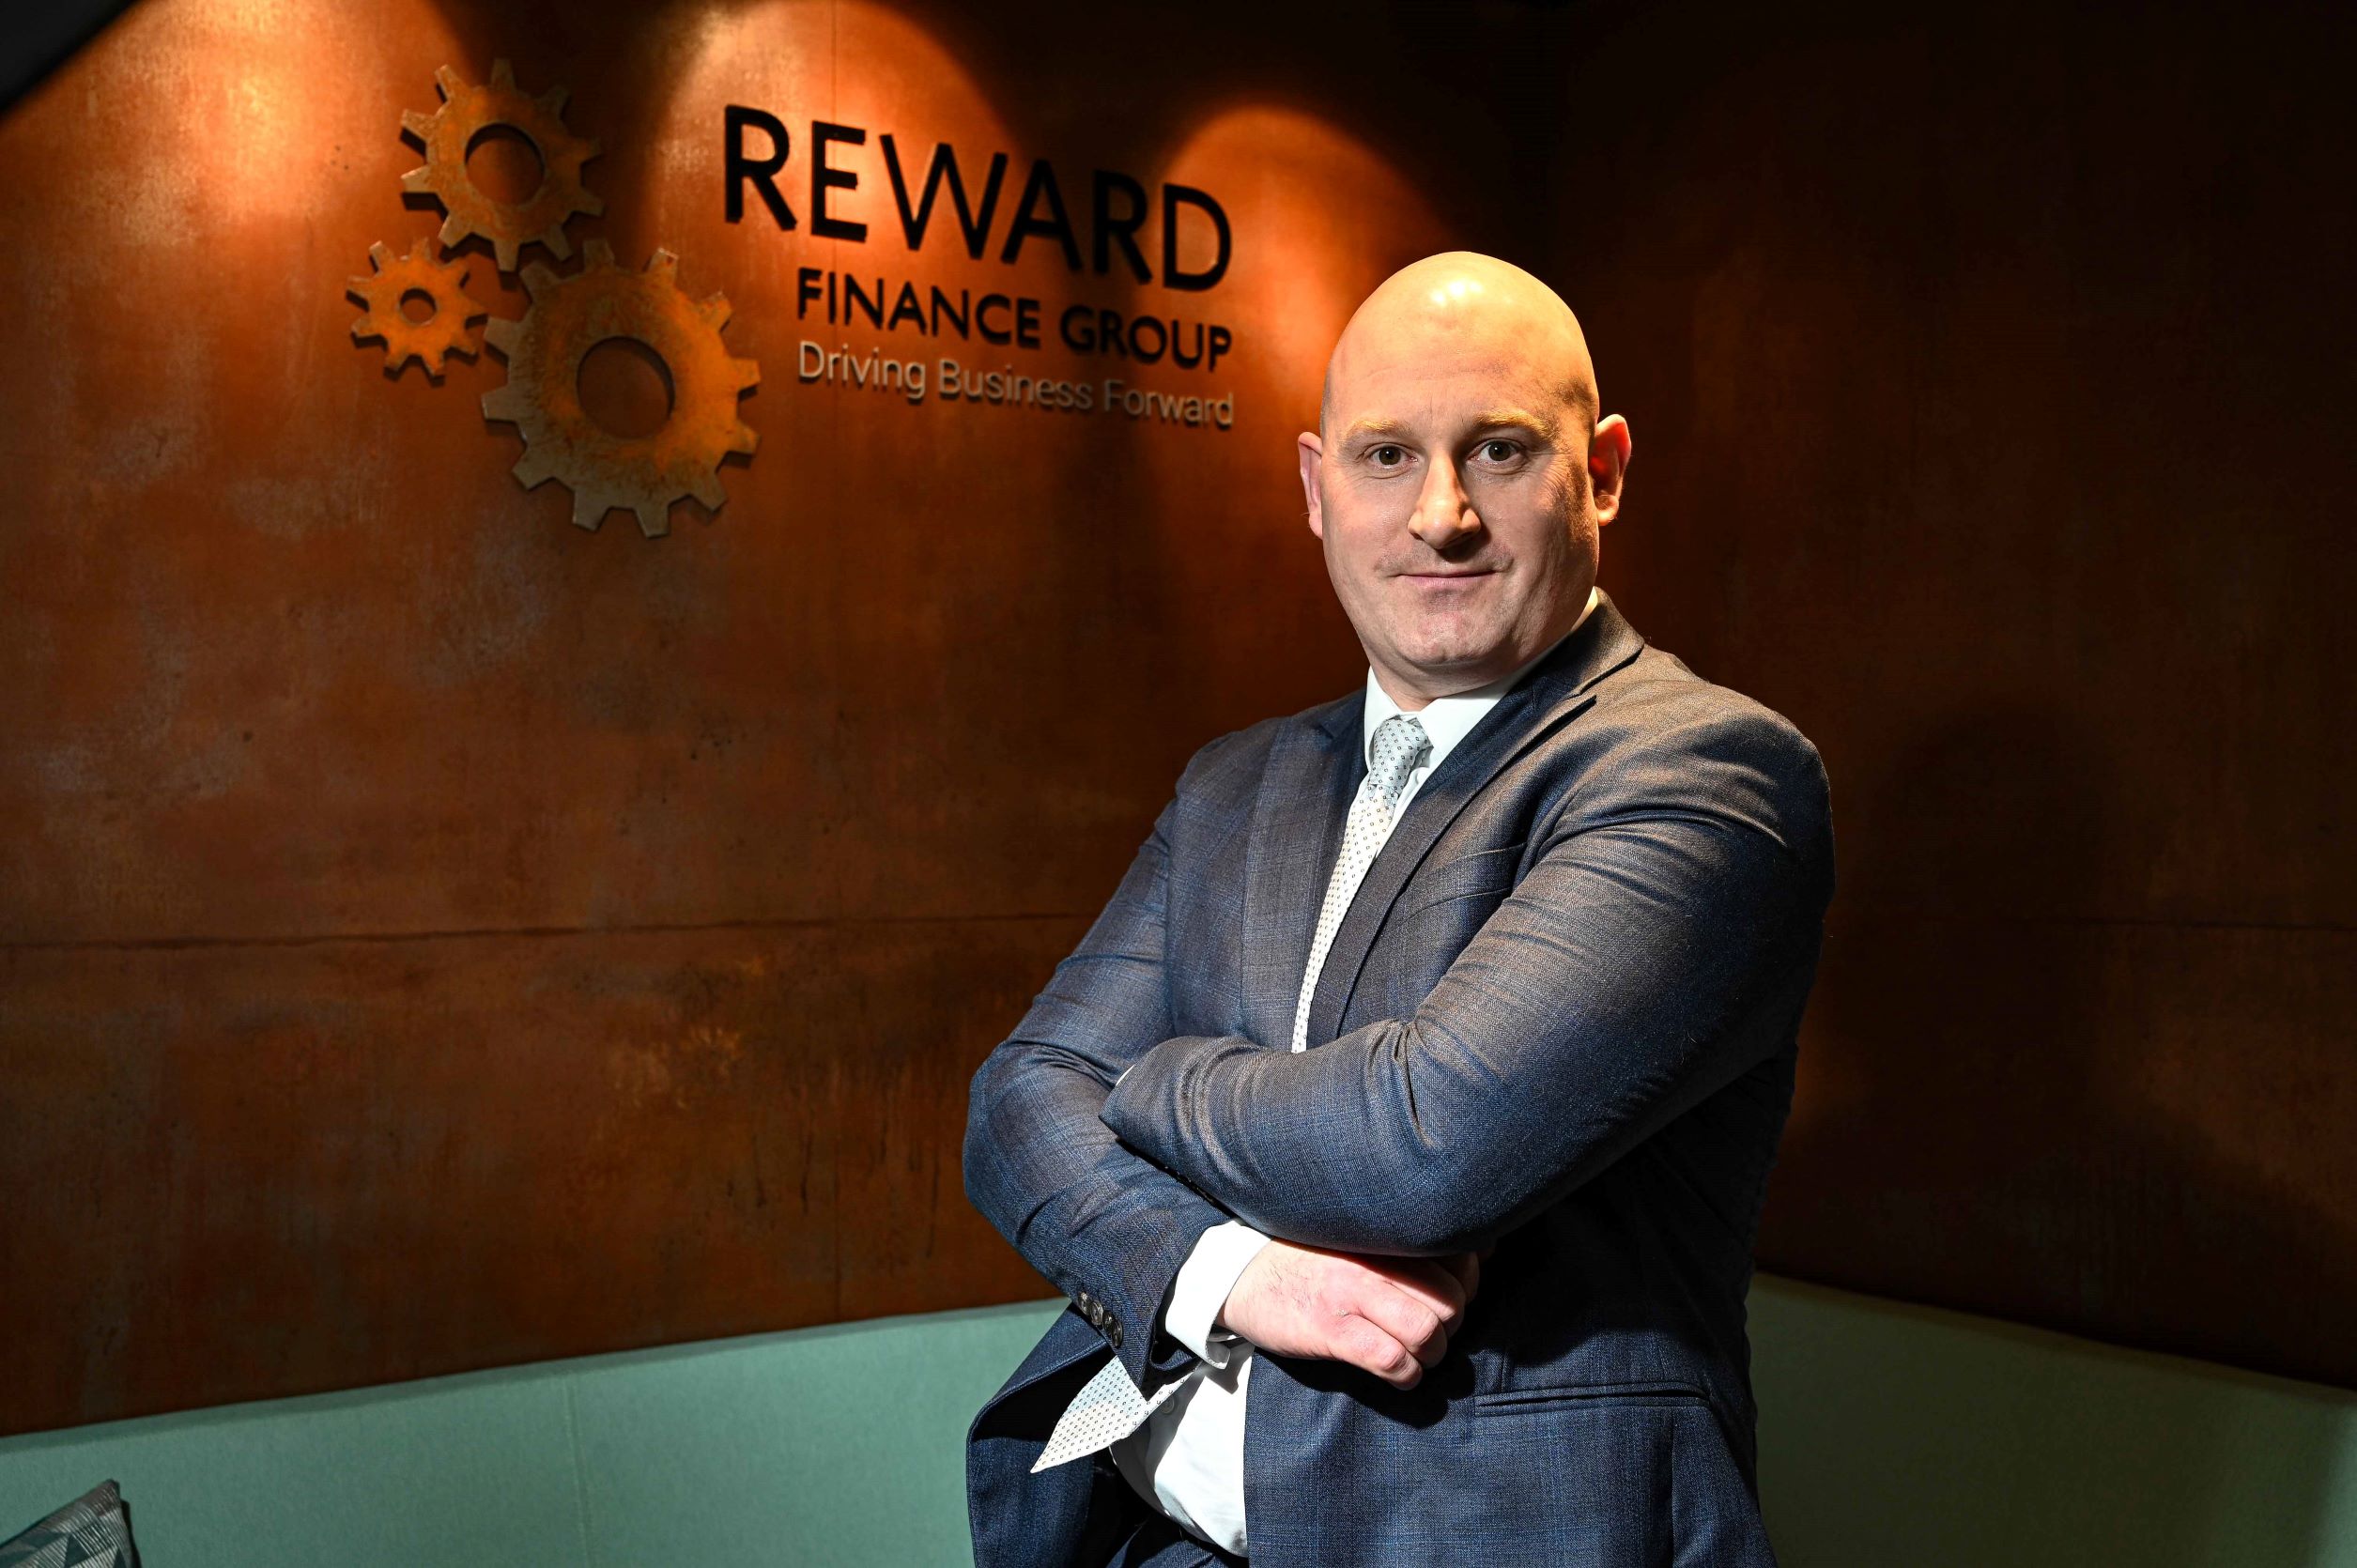 Brian Machray: Why are so many Scottish SMEs being declined finance by traditional funders?